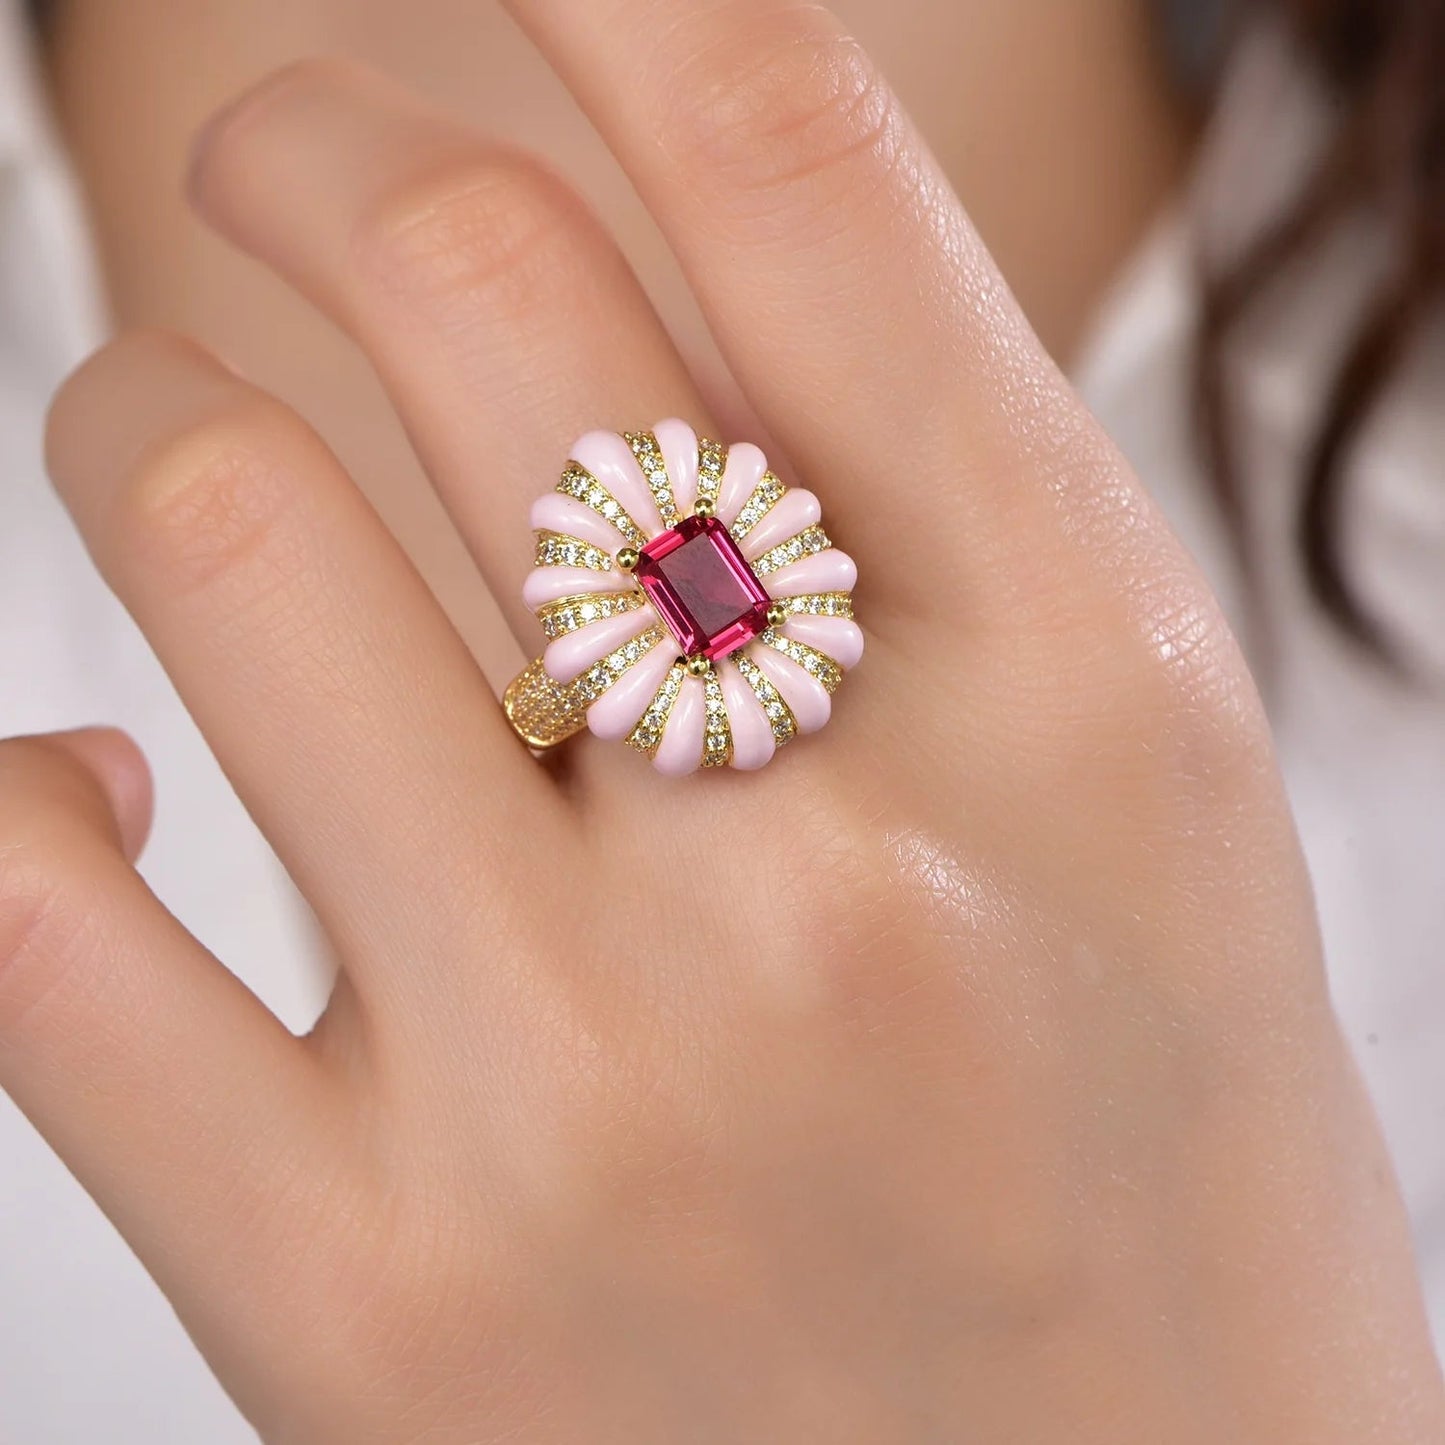 anelli anillos ruby emerald gold ring 2 gram gold plated ring price better radiation zircon ring Kirin Jewelry